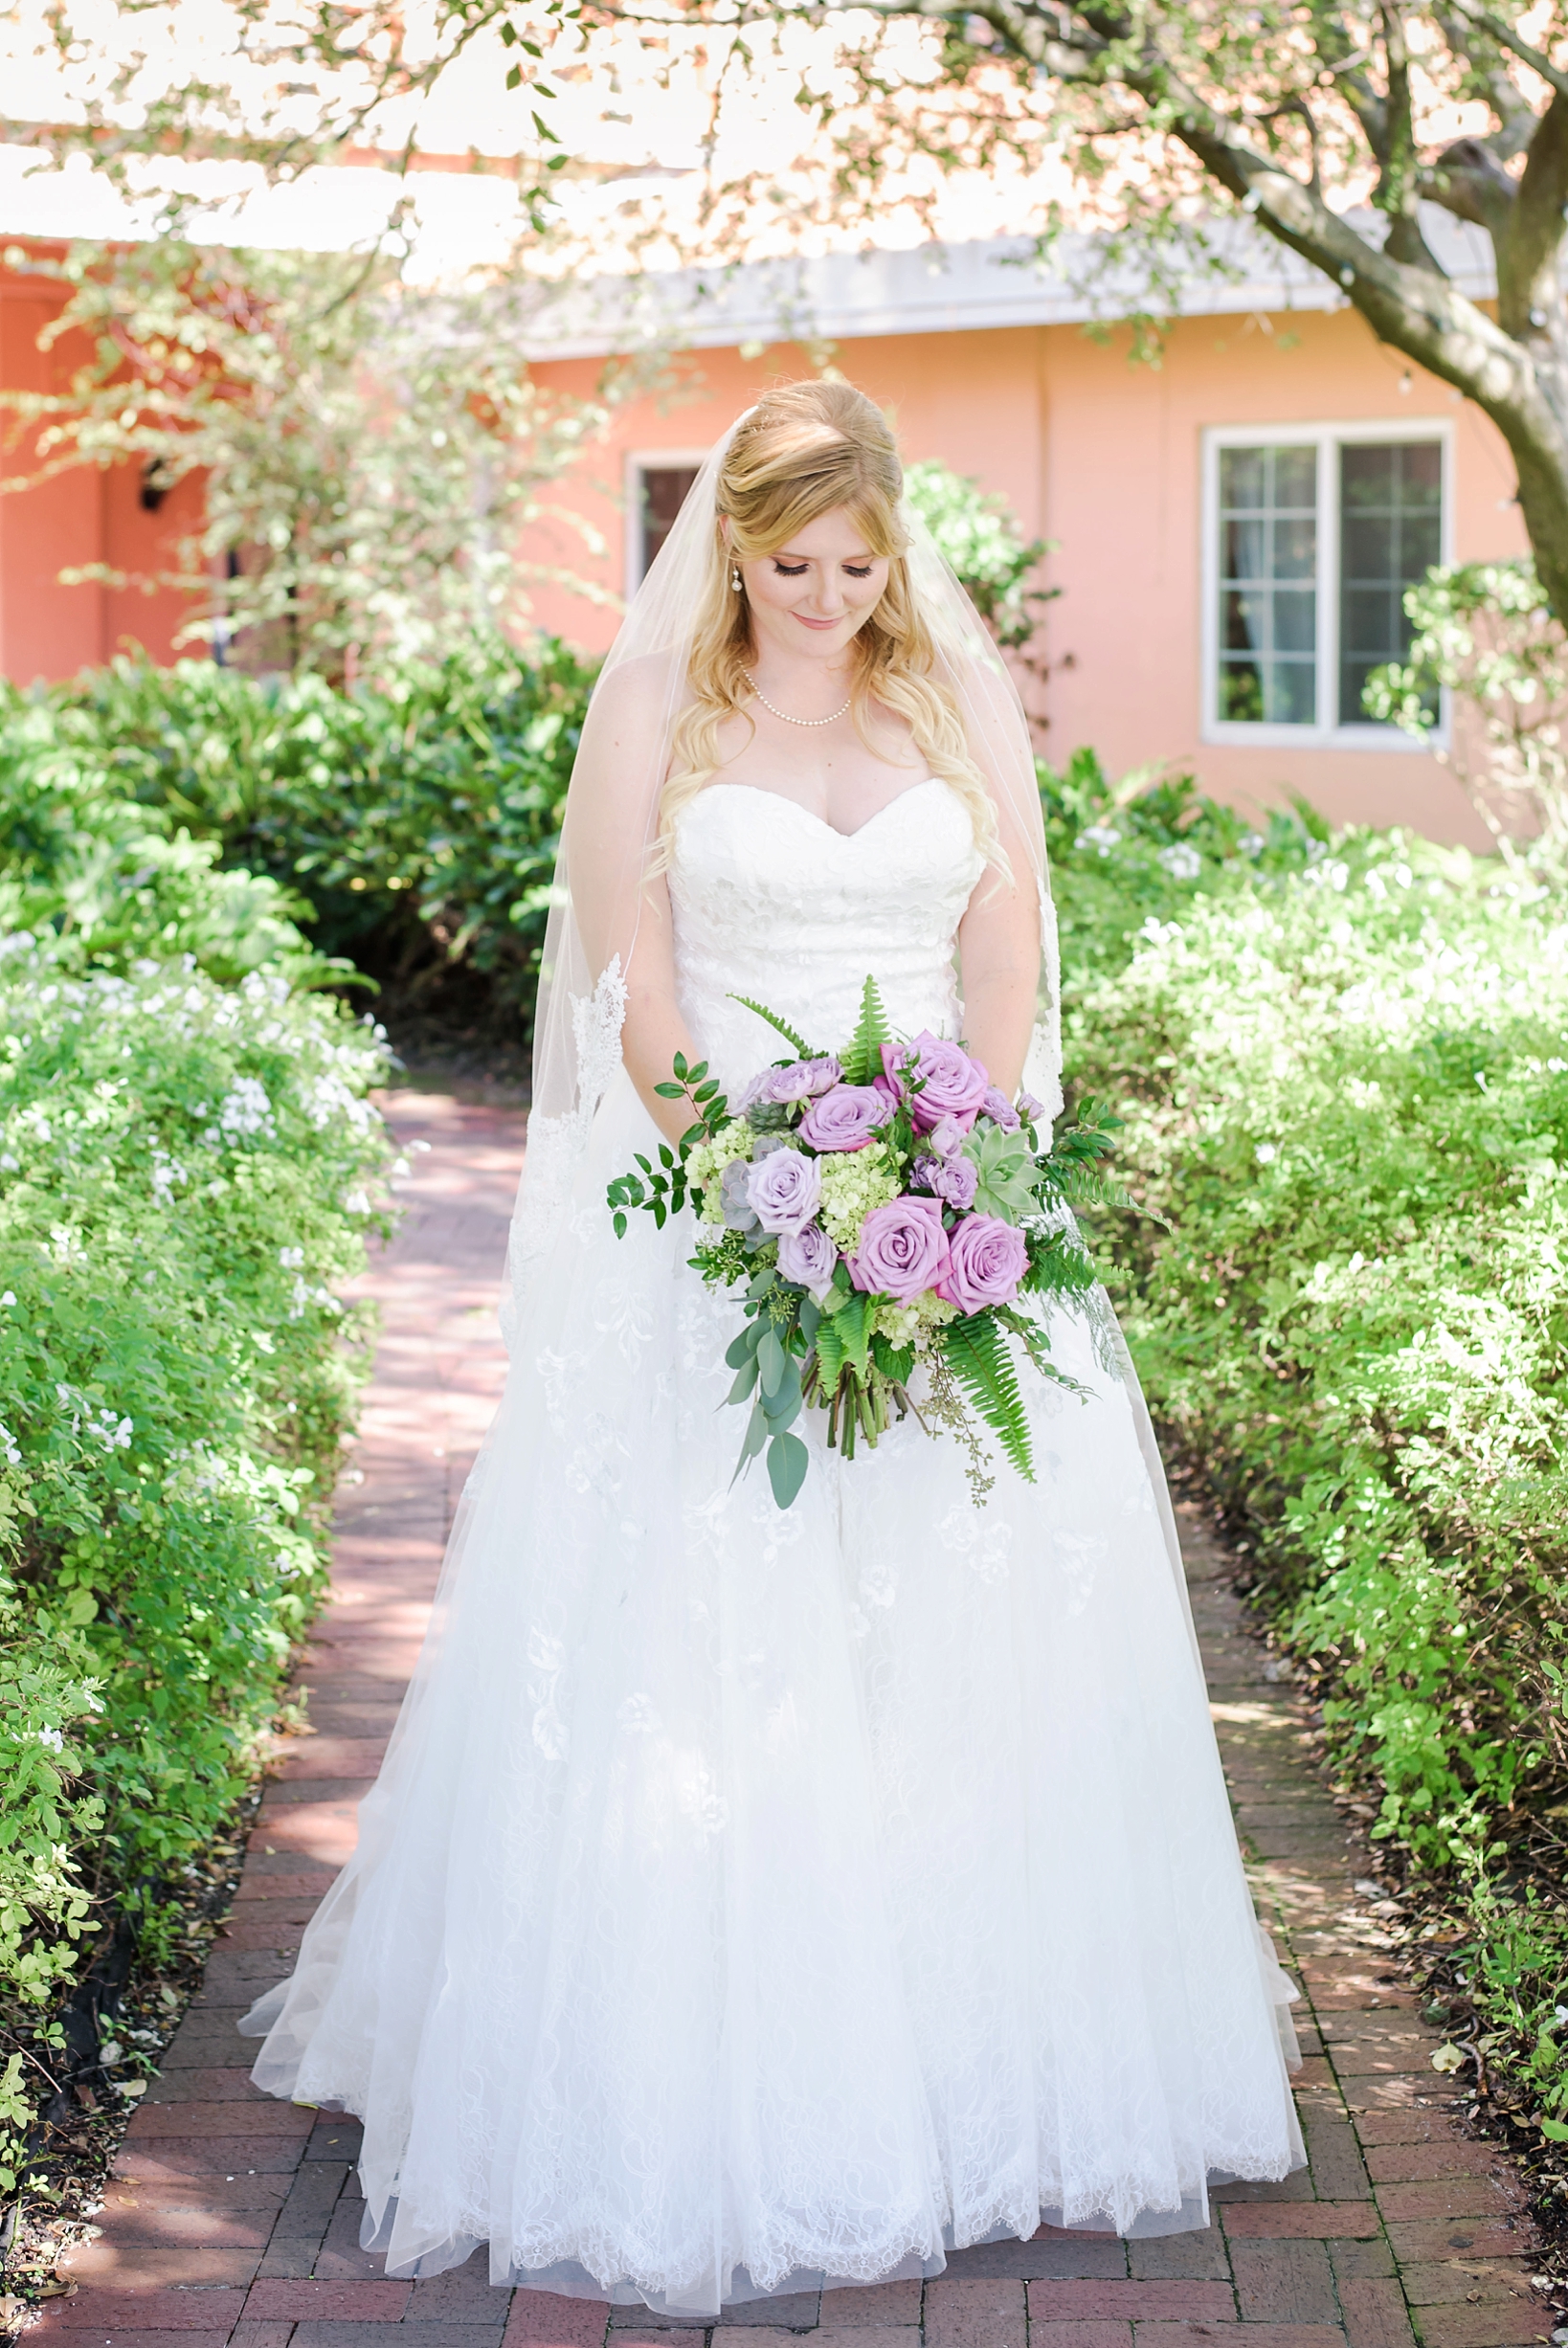 The bride holding her bouquet on a garden path